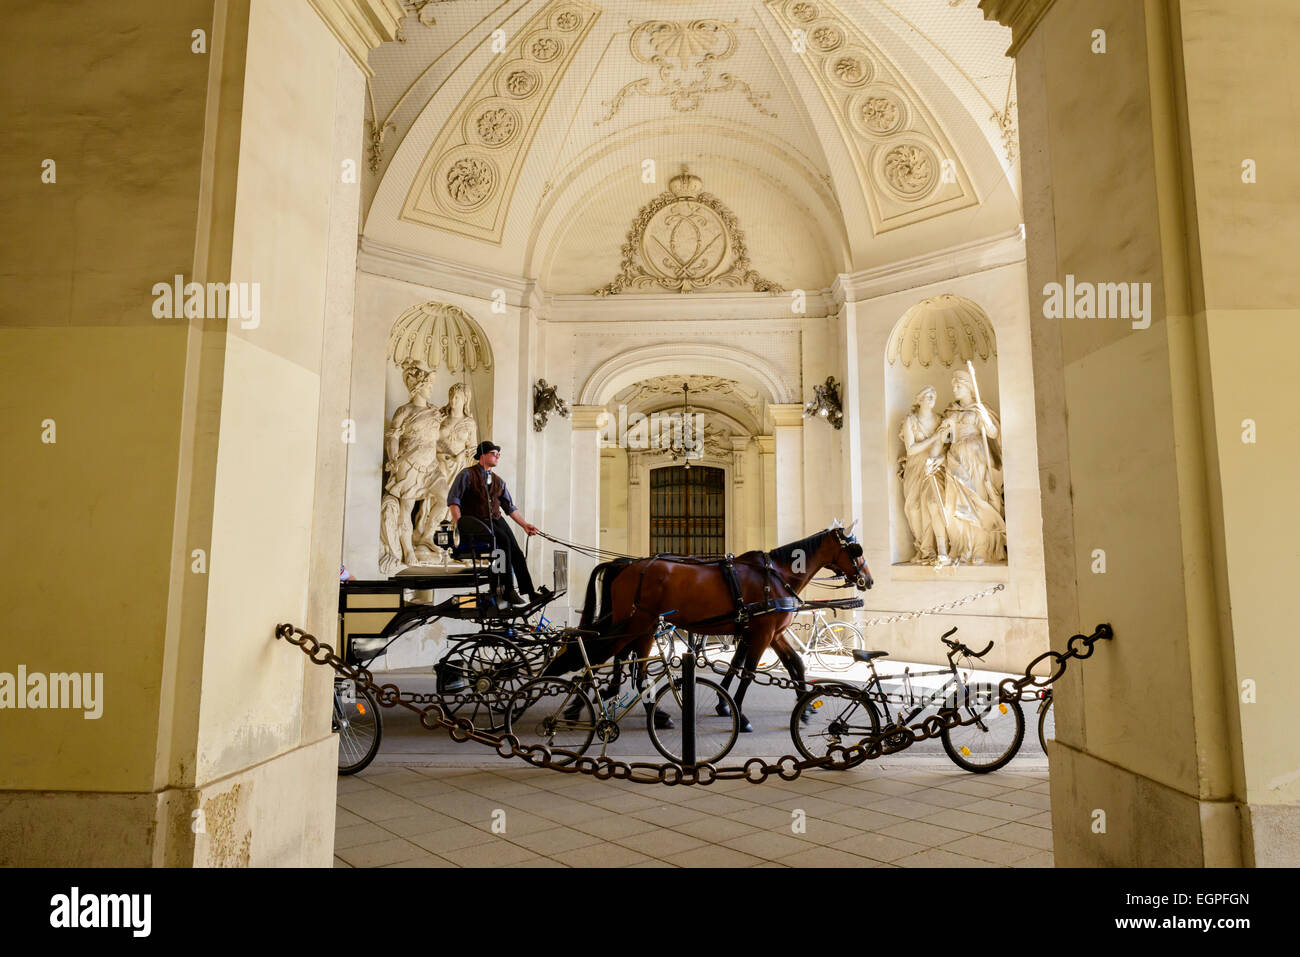 Horse carriage riding through a passage in Hofburg Palace, Vienna, Austria Stock Photo